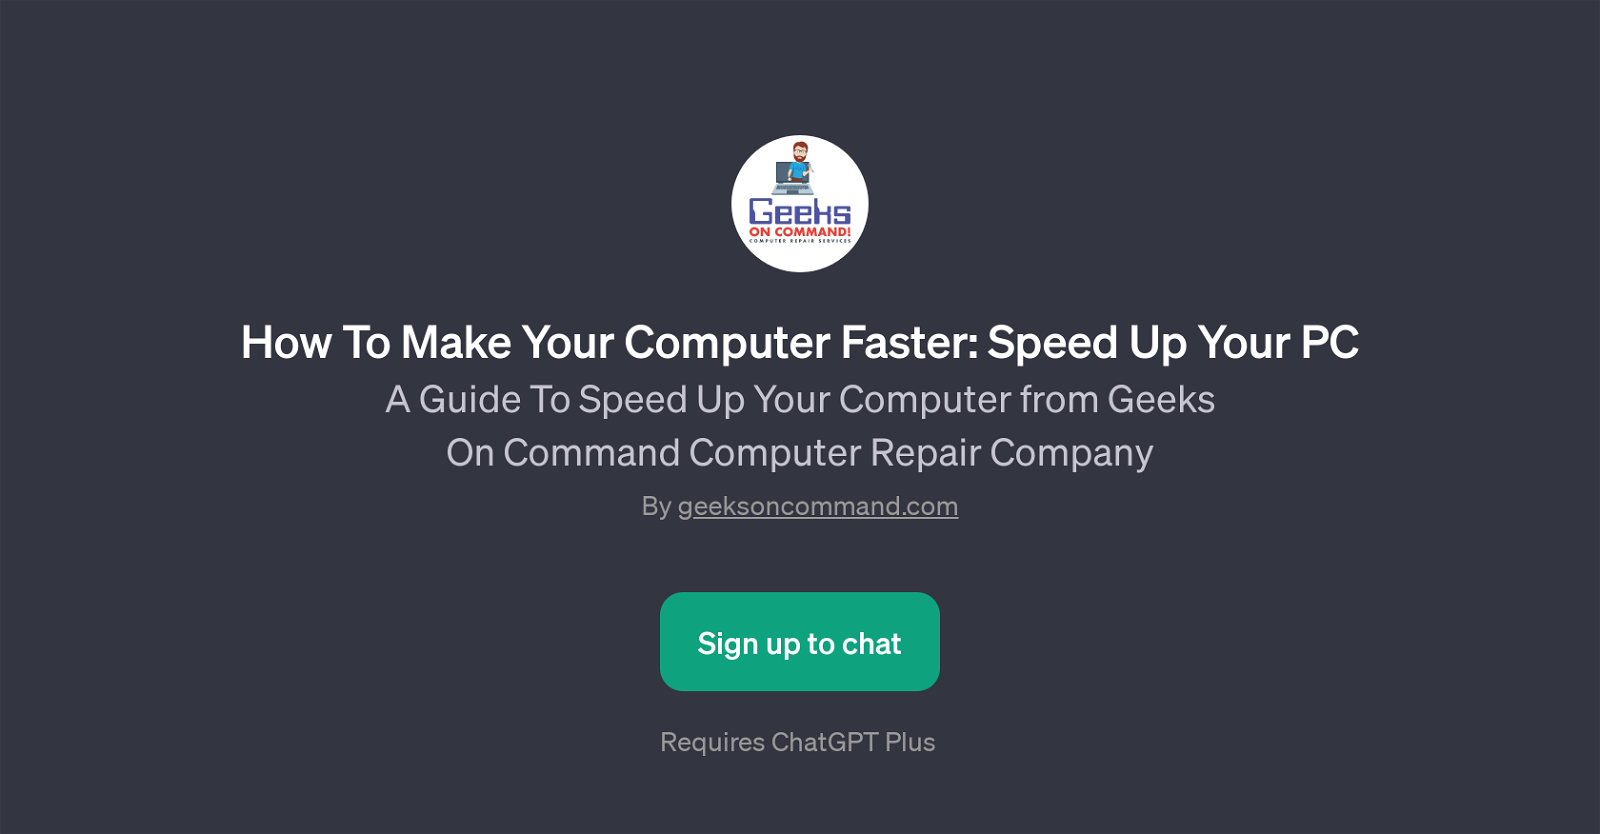 How To Make Your Computer Faster: Speed Up Your PC website